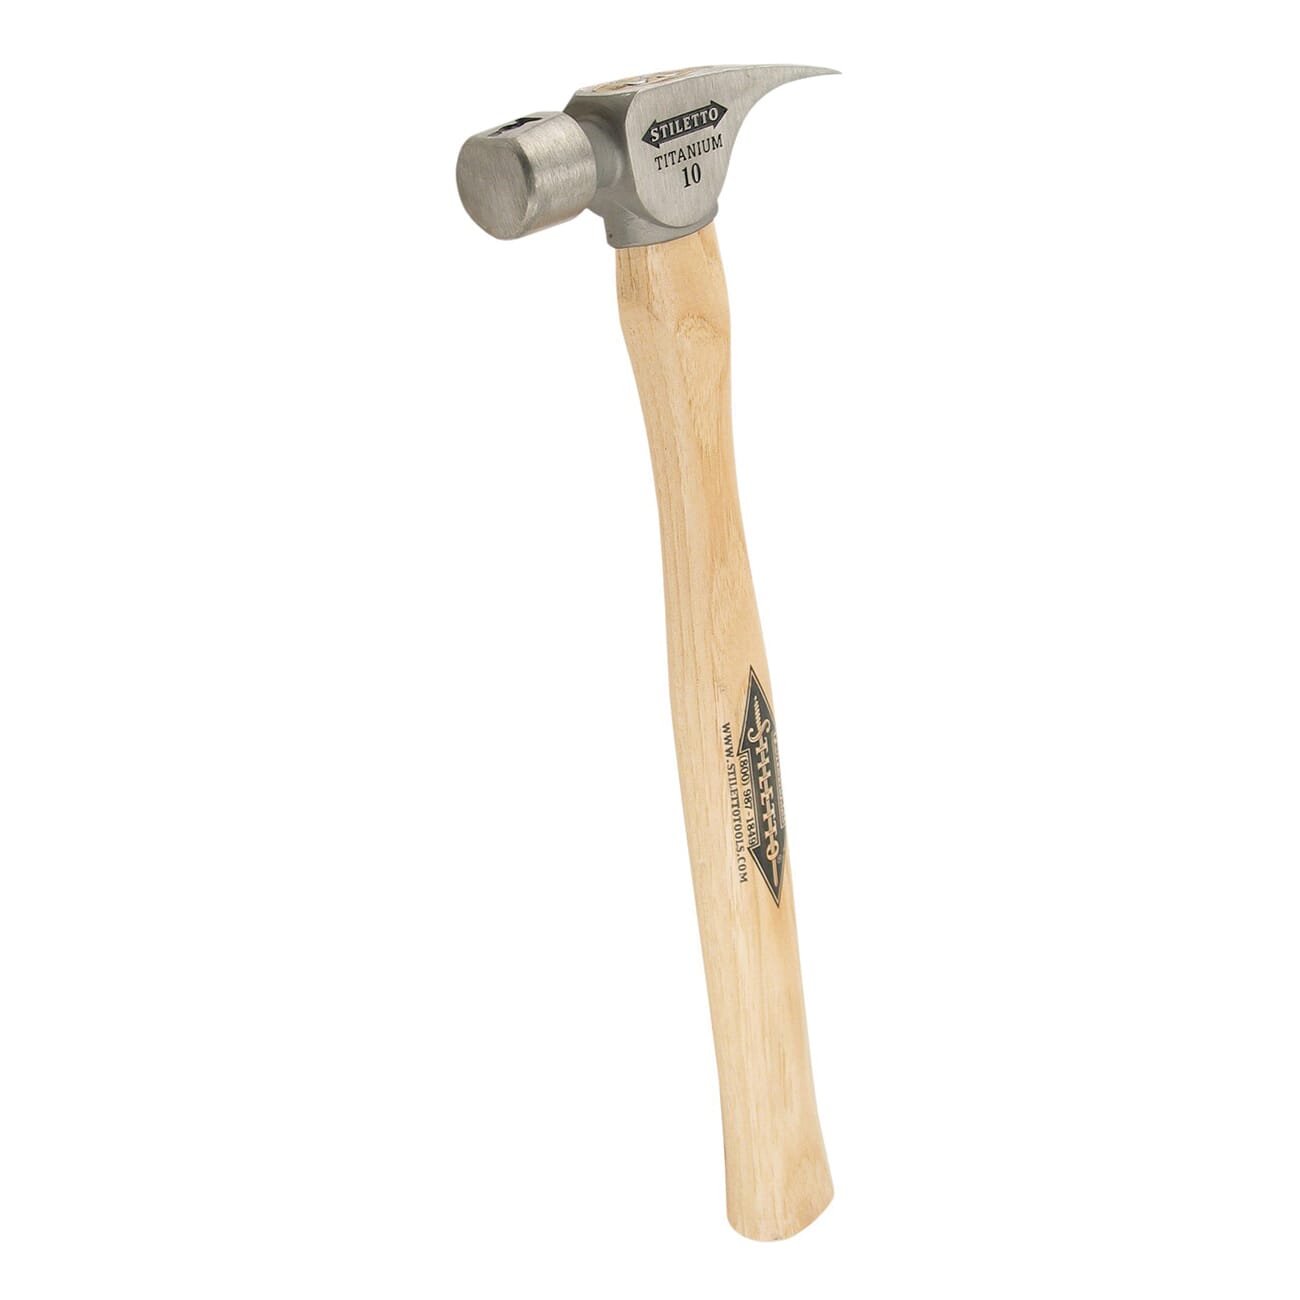 Stiletto® FH10S Heavy Duty Finishing Hammer, 16 in OAL, Smooth Surface, 10 oz Titanium Head, Straight Claw, Hickory Wood Handle